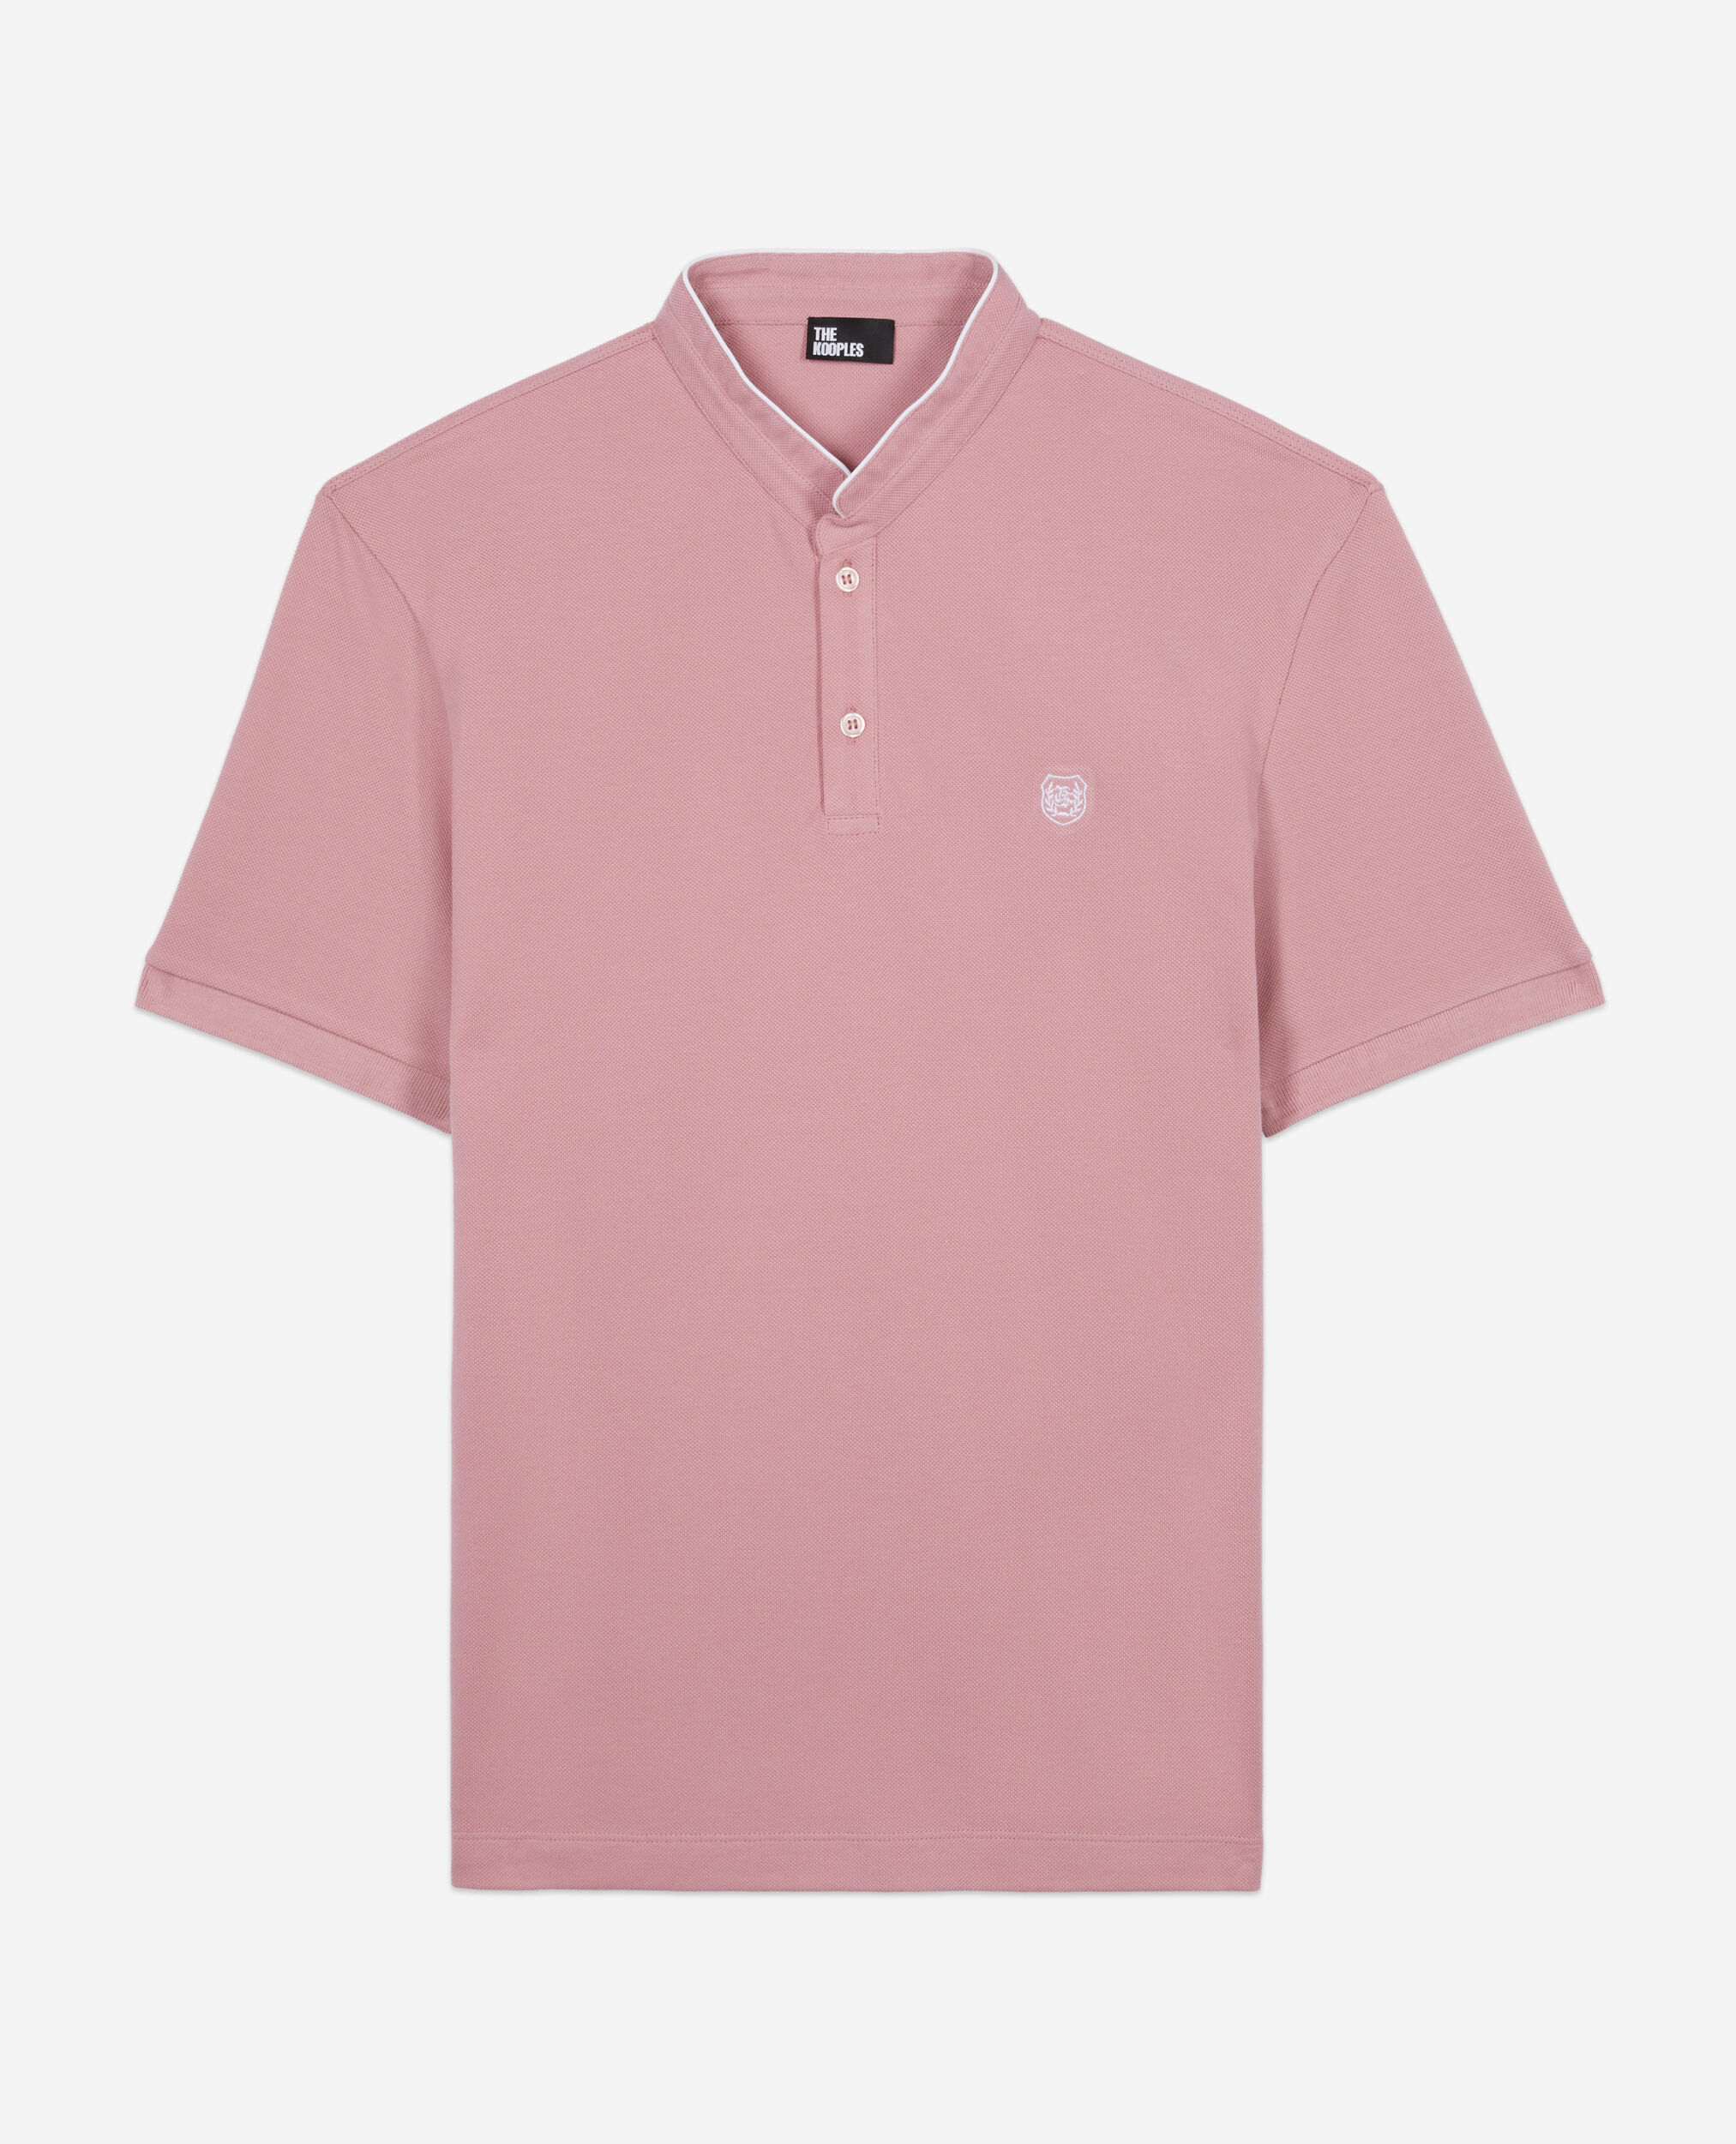 Pink pique cotton polo t-shirt, PINK WOOD, hi-res image number null